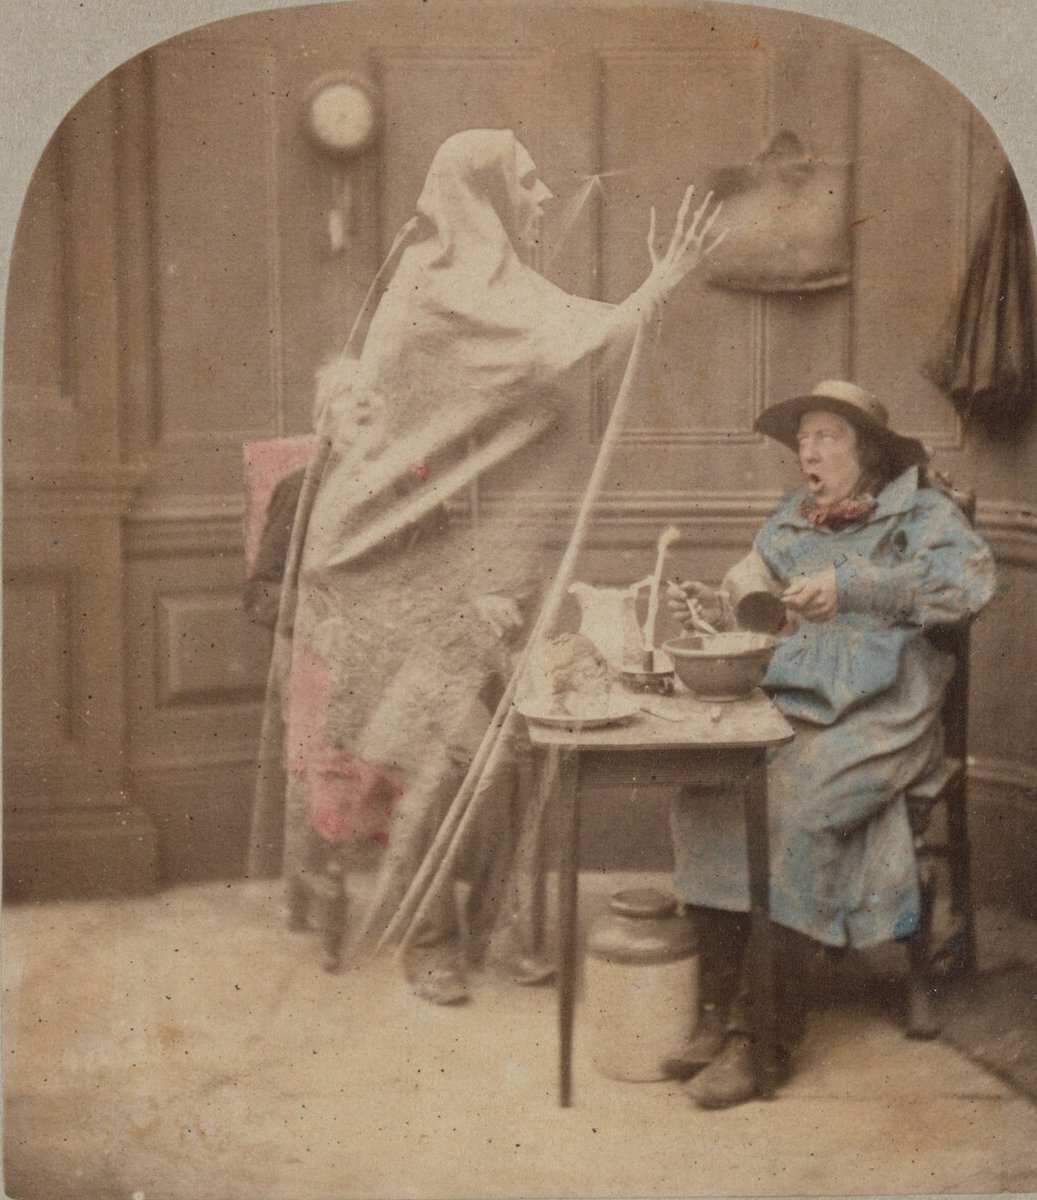 Happy Halloween 🎃👻 Image: One-half of a stereo pair from the London Stereoscopic Co’s The Ghost in the Stereoscope c1861.